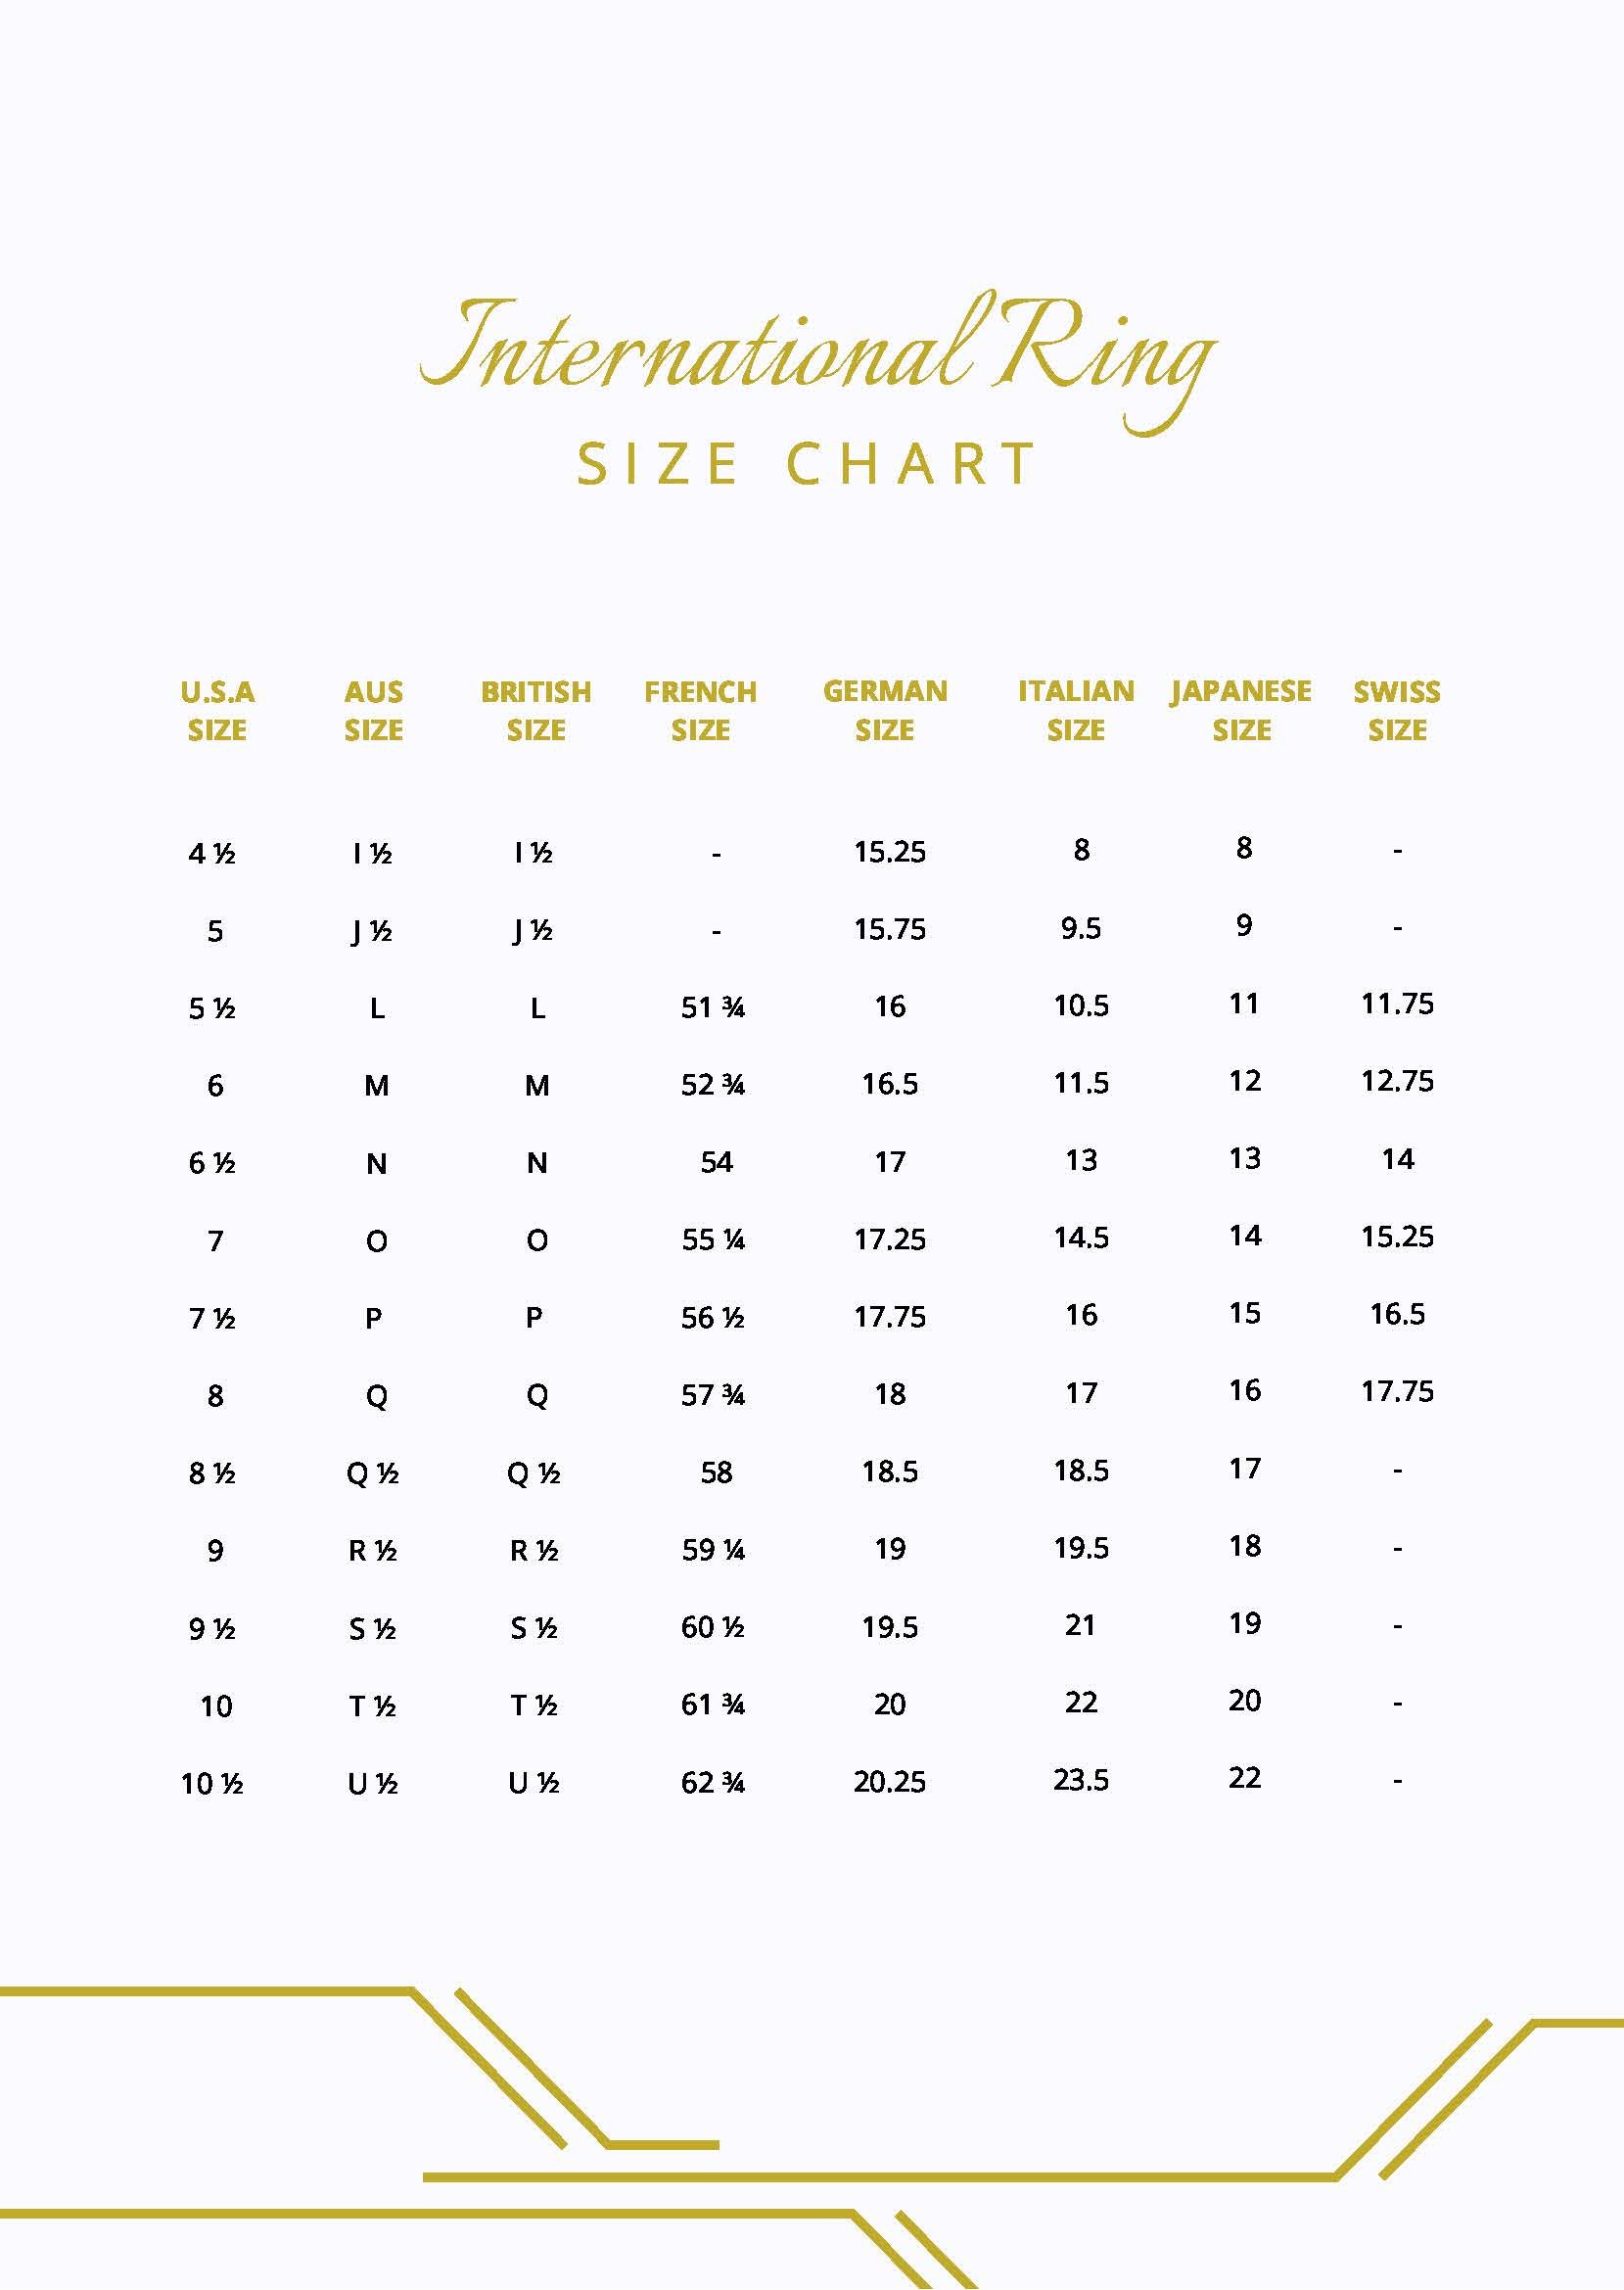 International Ring Size Chart in PDF - Download | Template.net